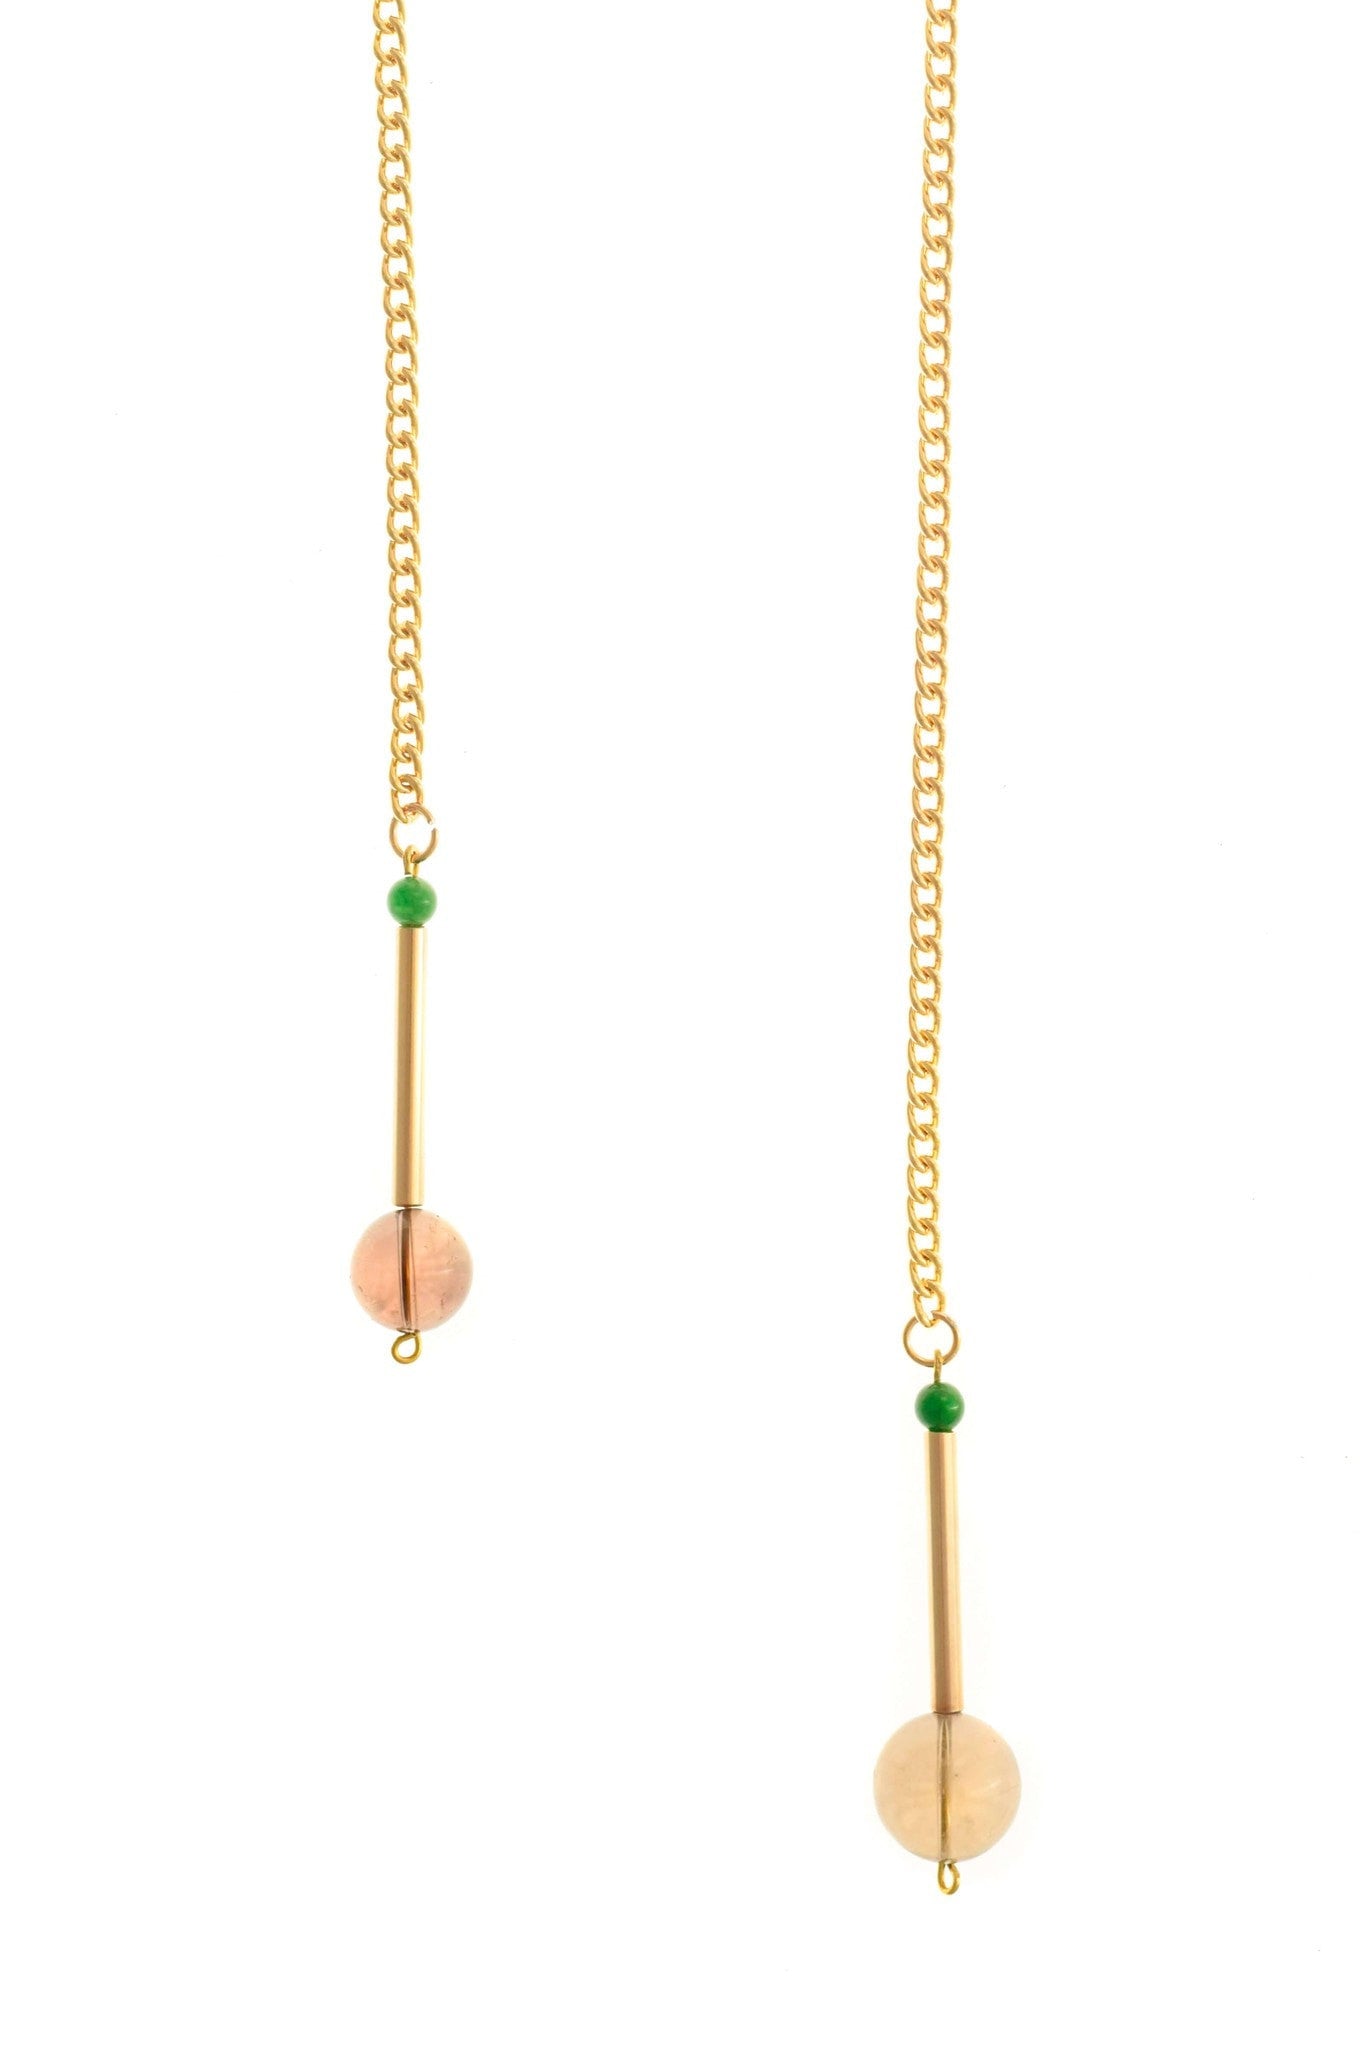 The Bellevue necklace made of hand-cut and galvanized brass, smokey quartz, jade and galvanized chain.